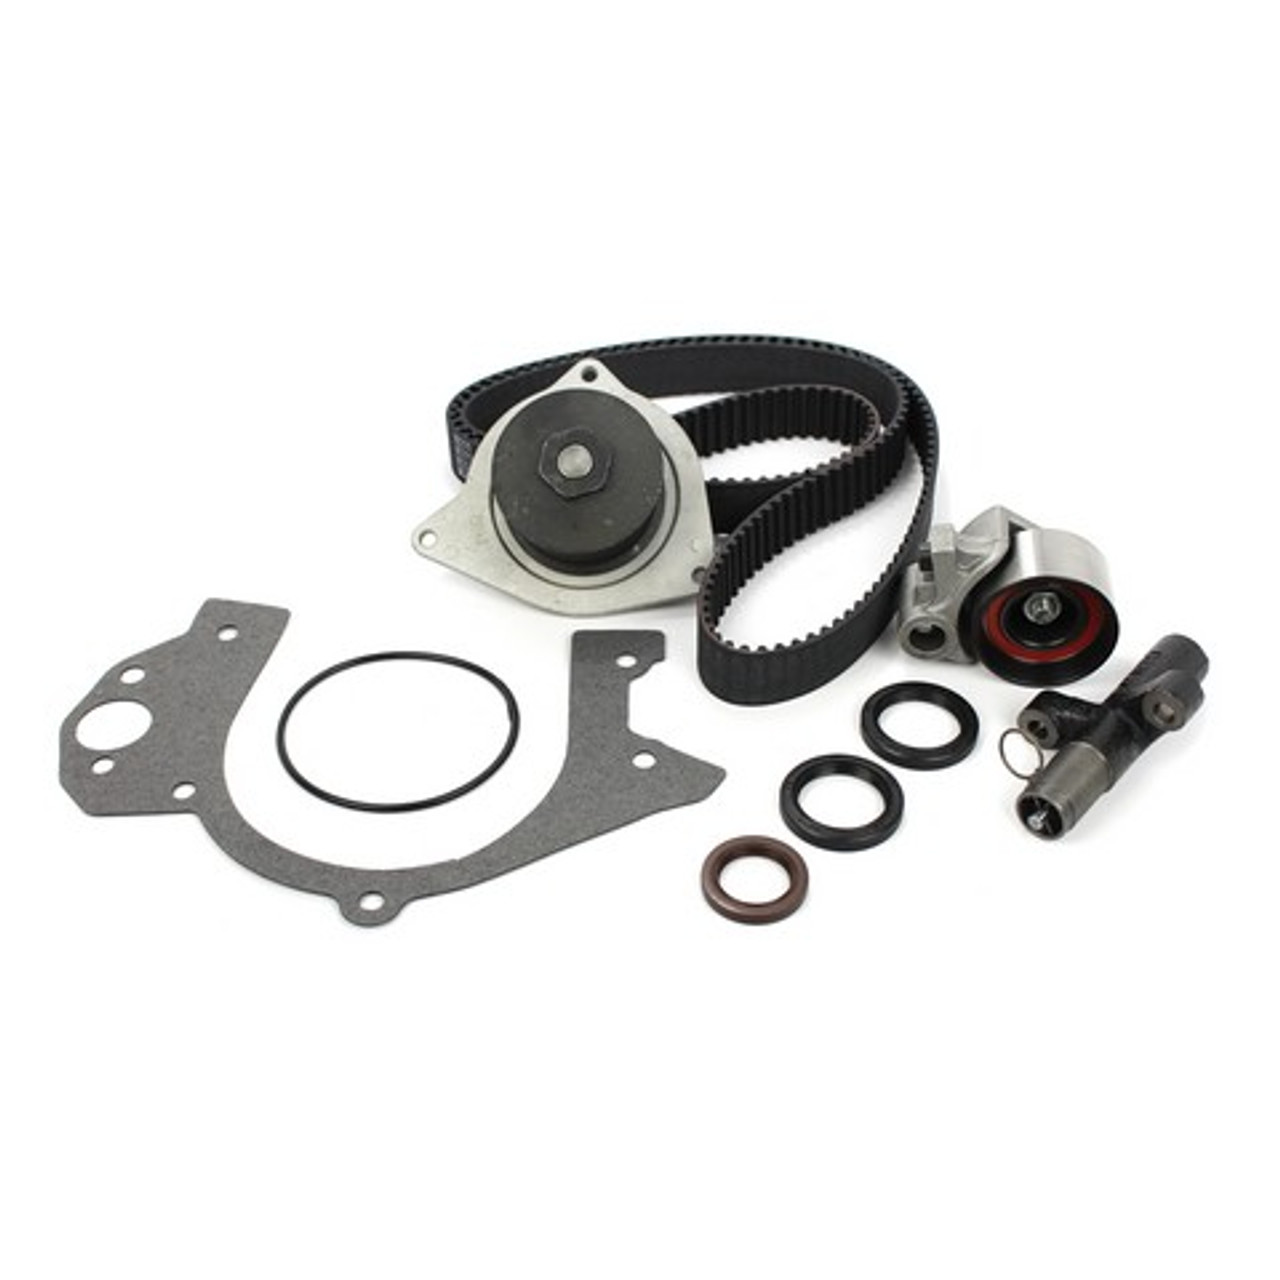 Timing Belt Kit with Water Pump 3.5L 1996 Chrysler New Yorker - TBK1145AWP.8